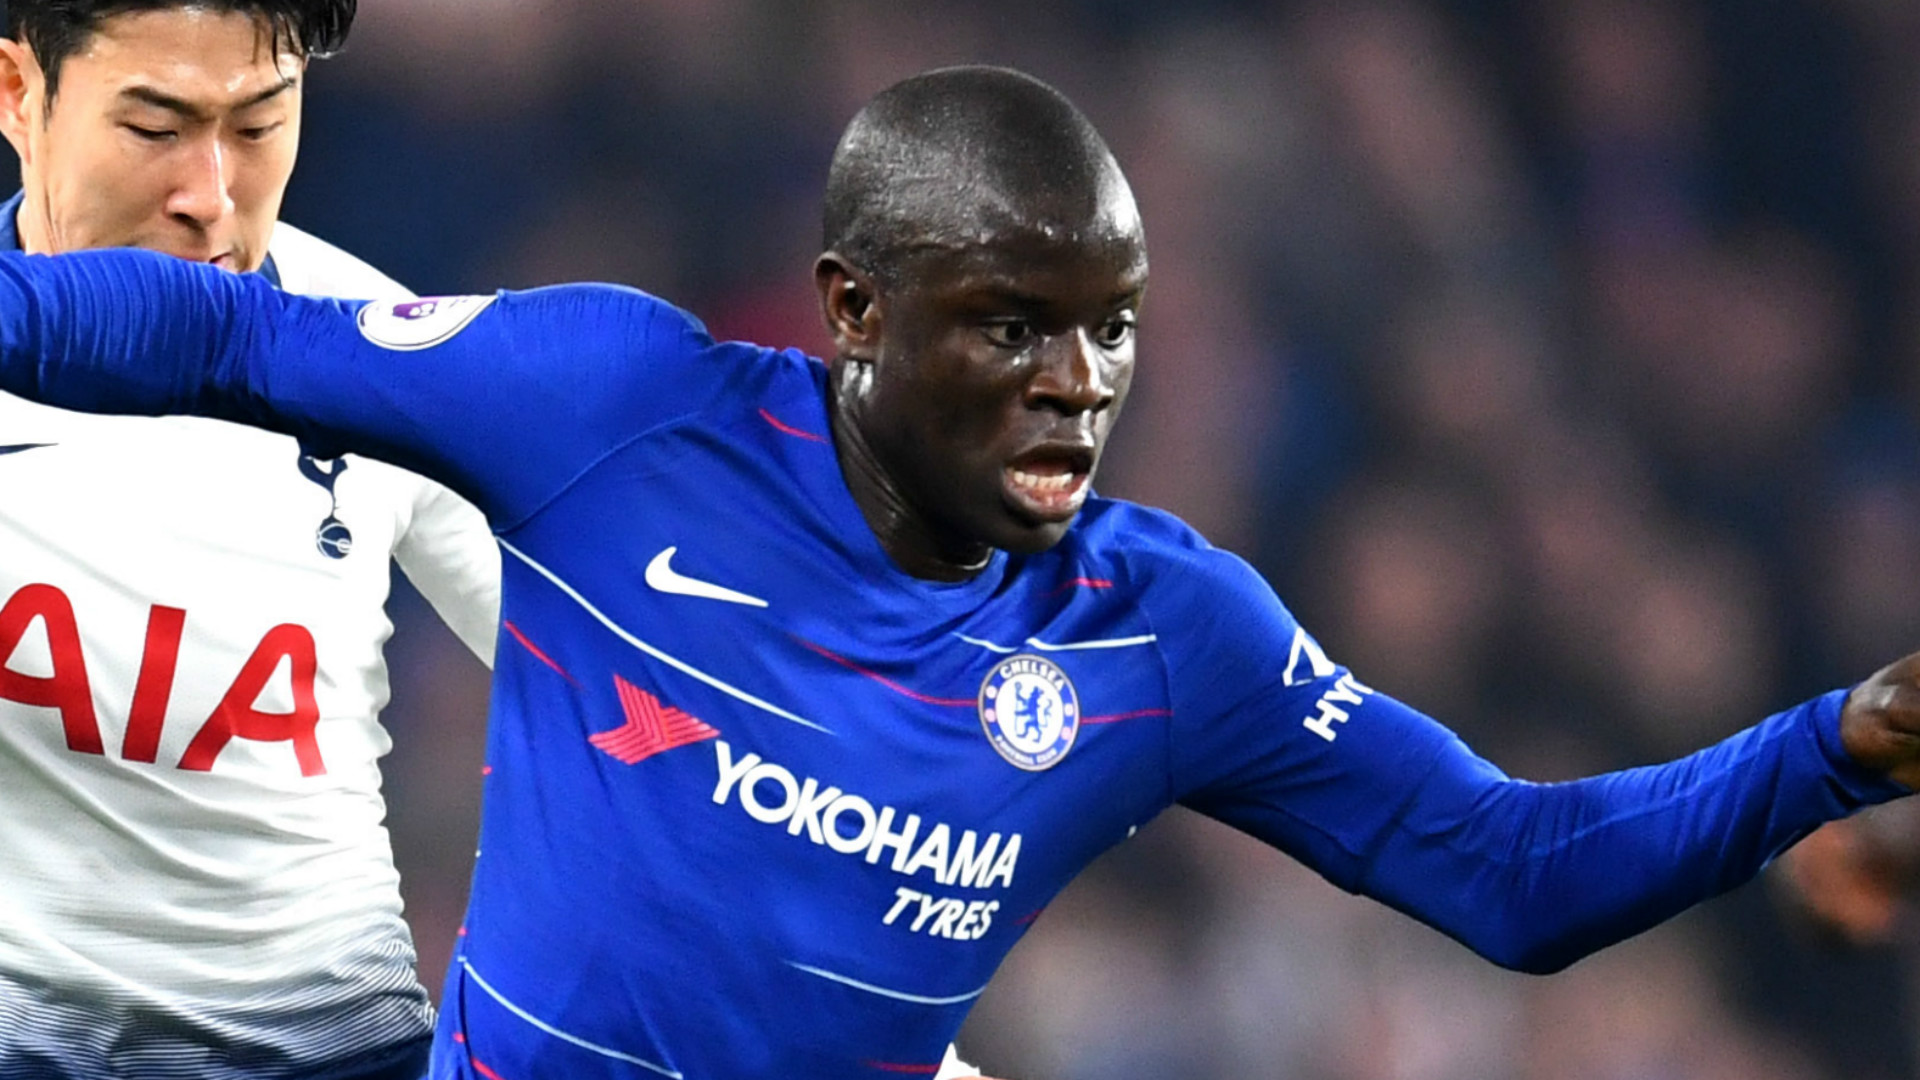 Transfer news and rumours LIVE: Real Madrid and Juve lead chase for Kante | Goal.com1920 x 1080